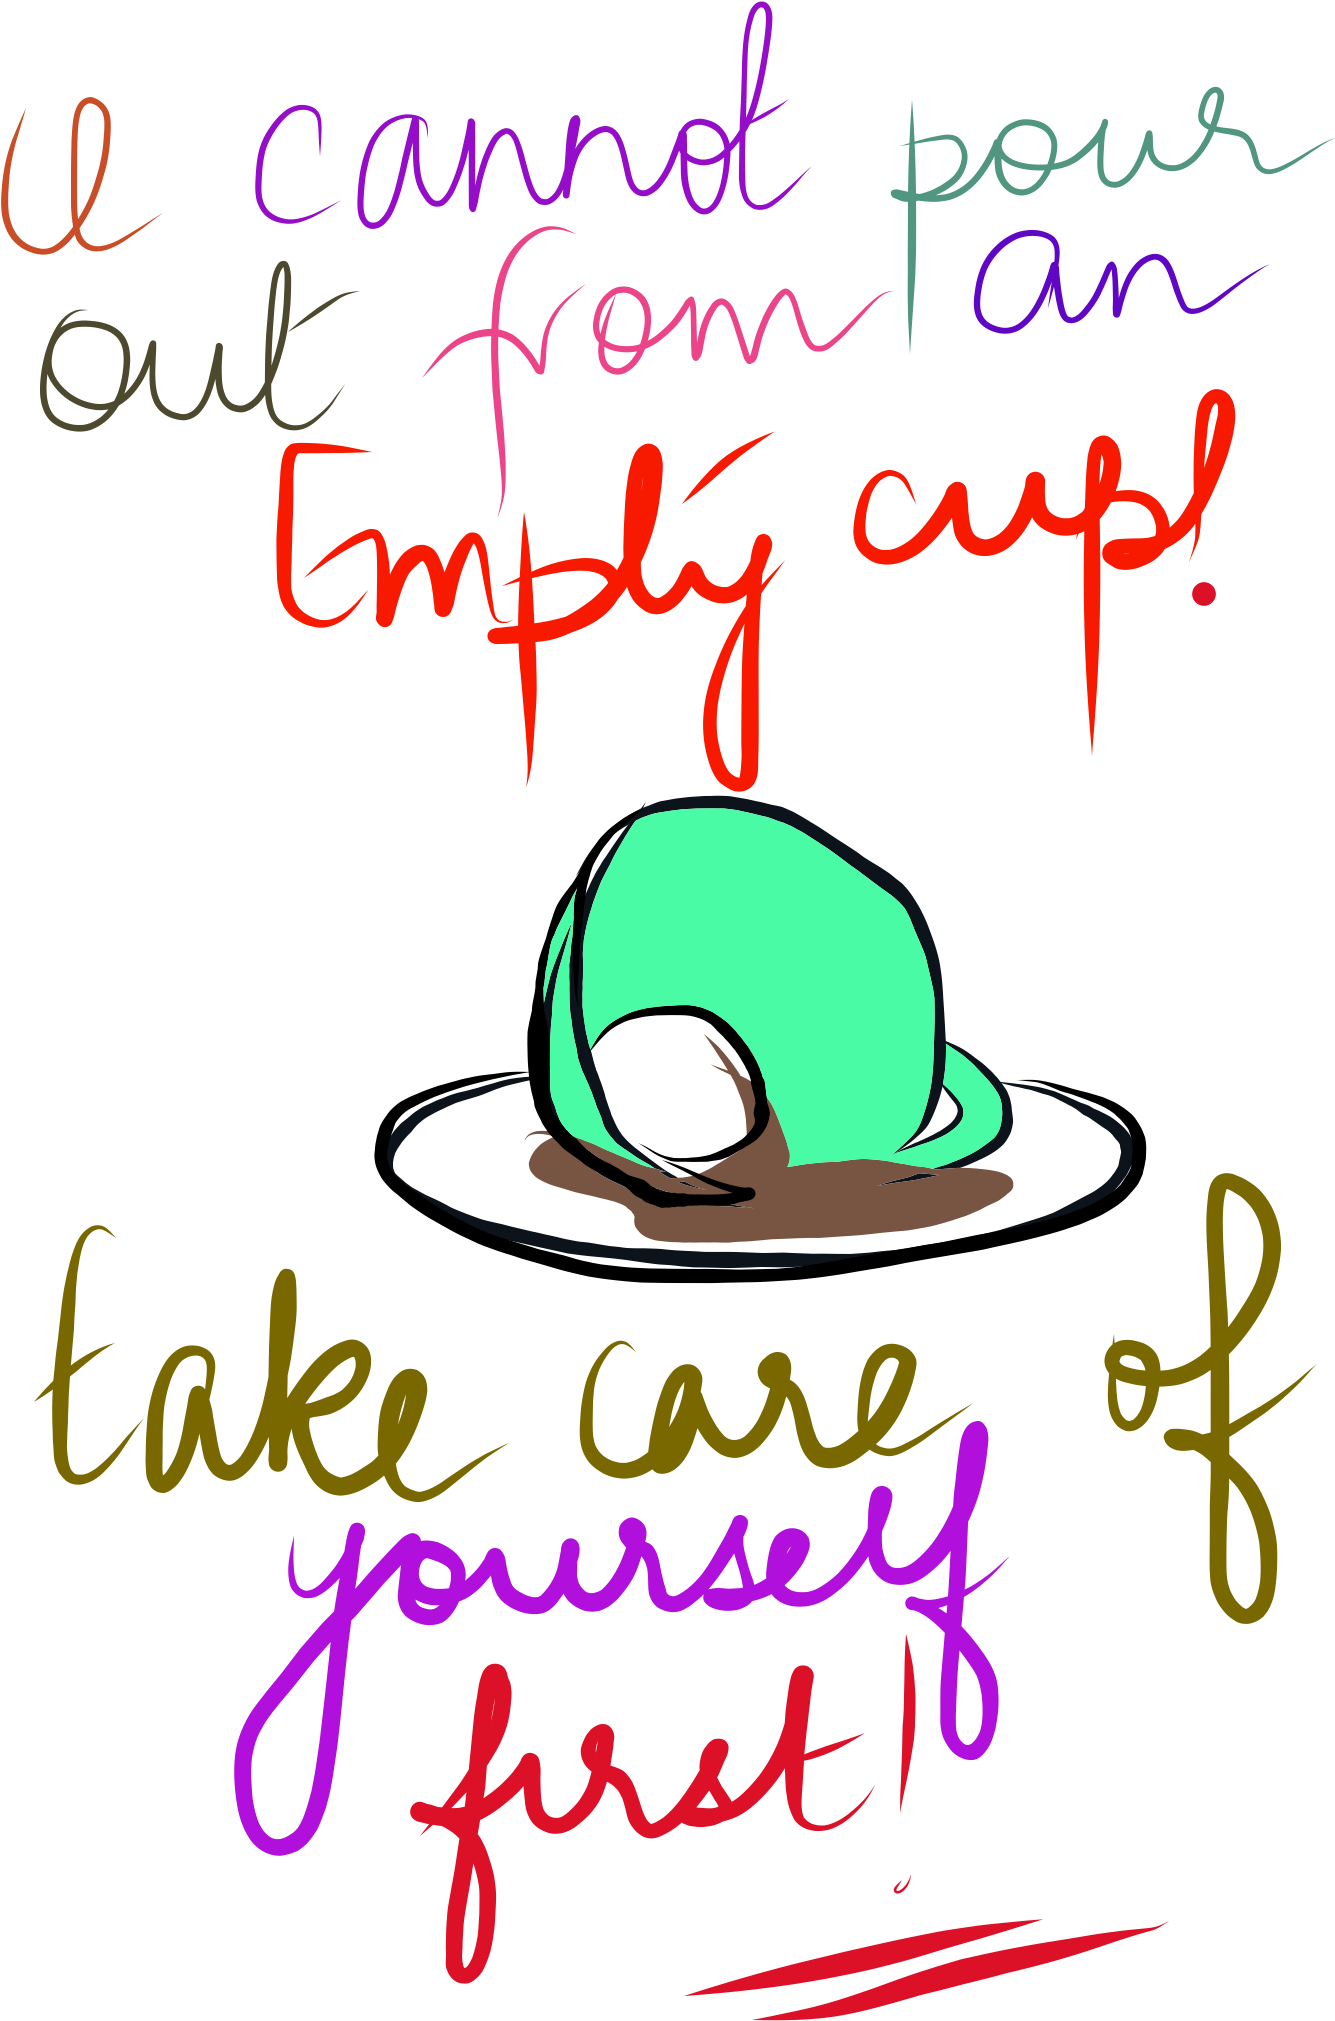 Only You Can Take Care Of Yourself - Help Yourself Only You Care (1536x2048)